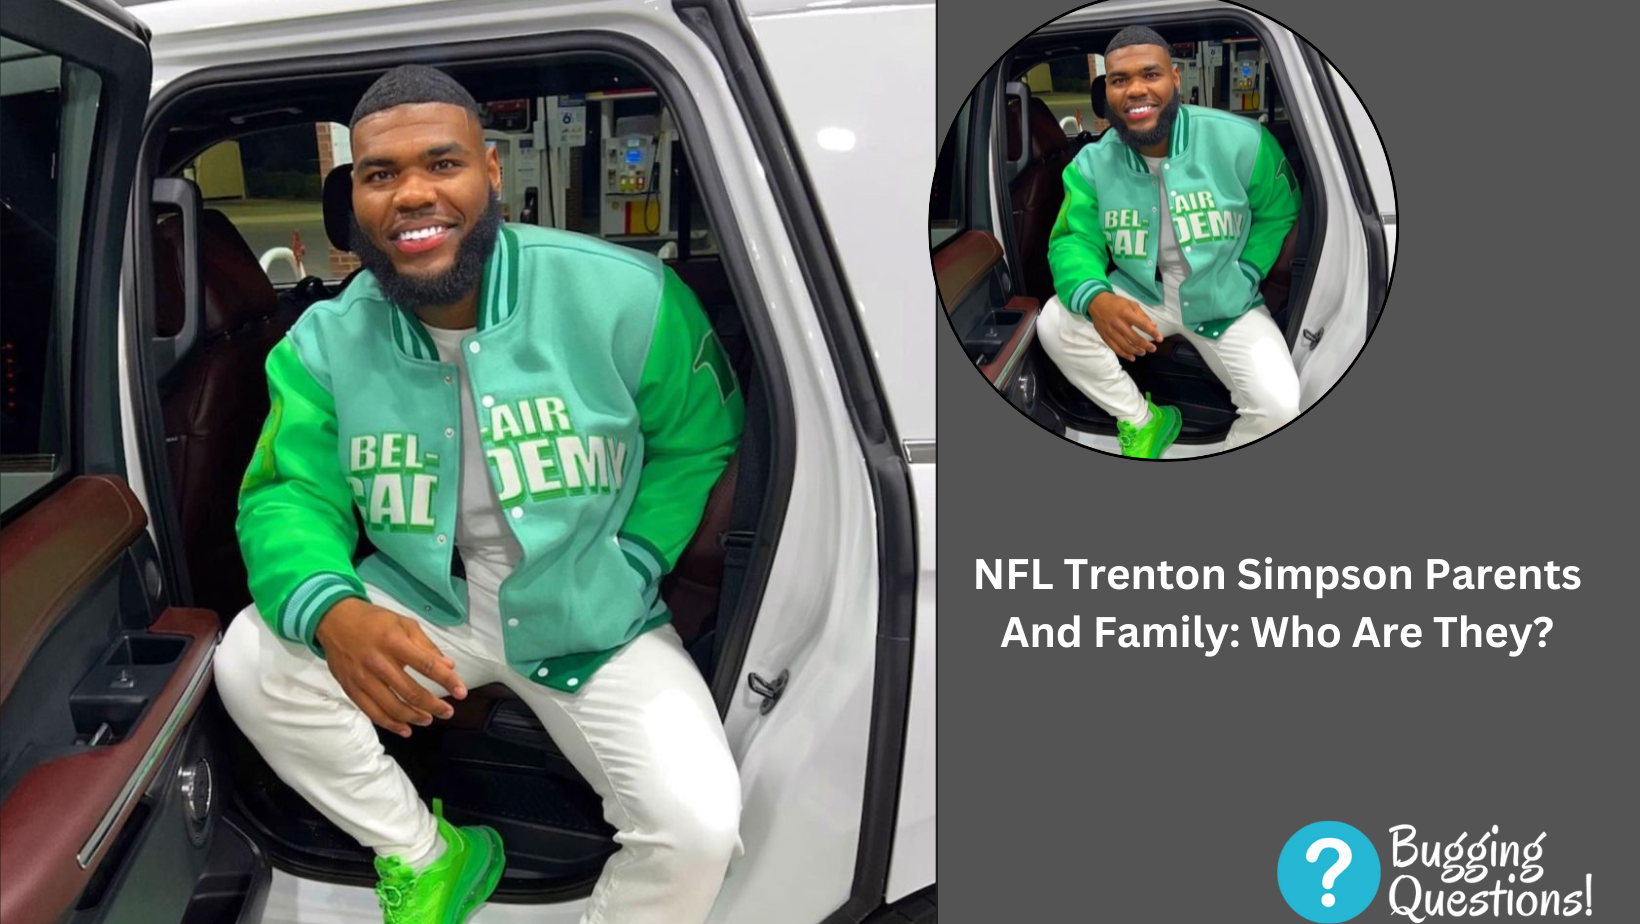 NFL Trenton Simpson Parents And Family: Who Are They?